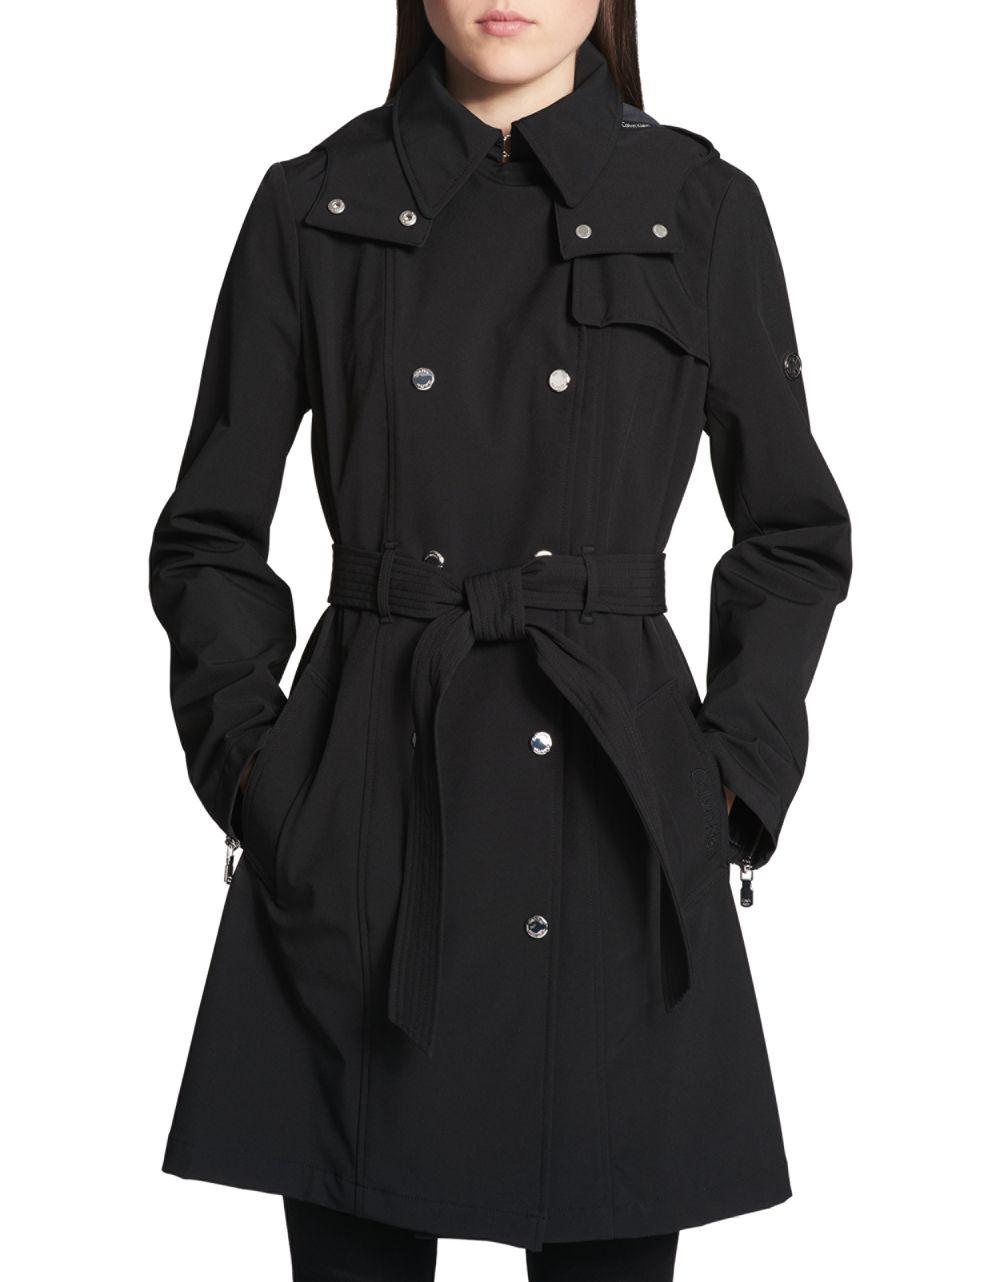 Calvin Klein Classic Hooded Trench Coat in Black - Lyst